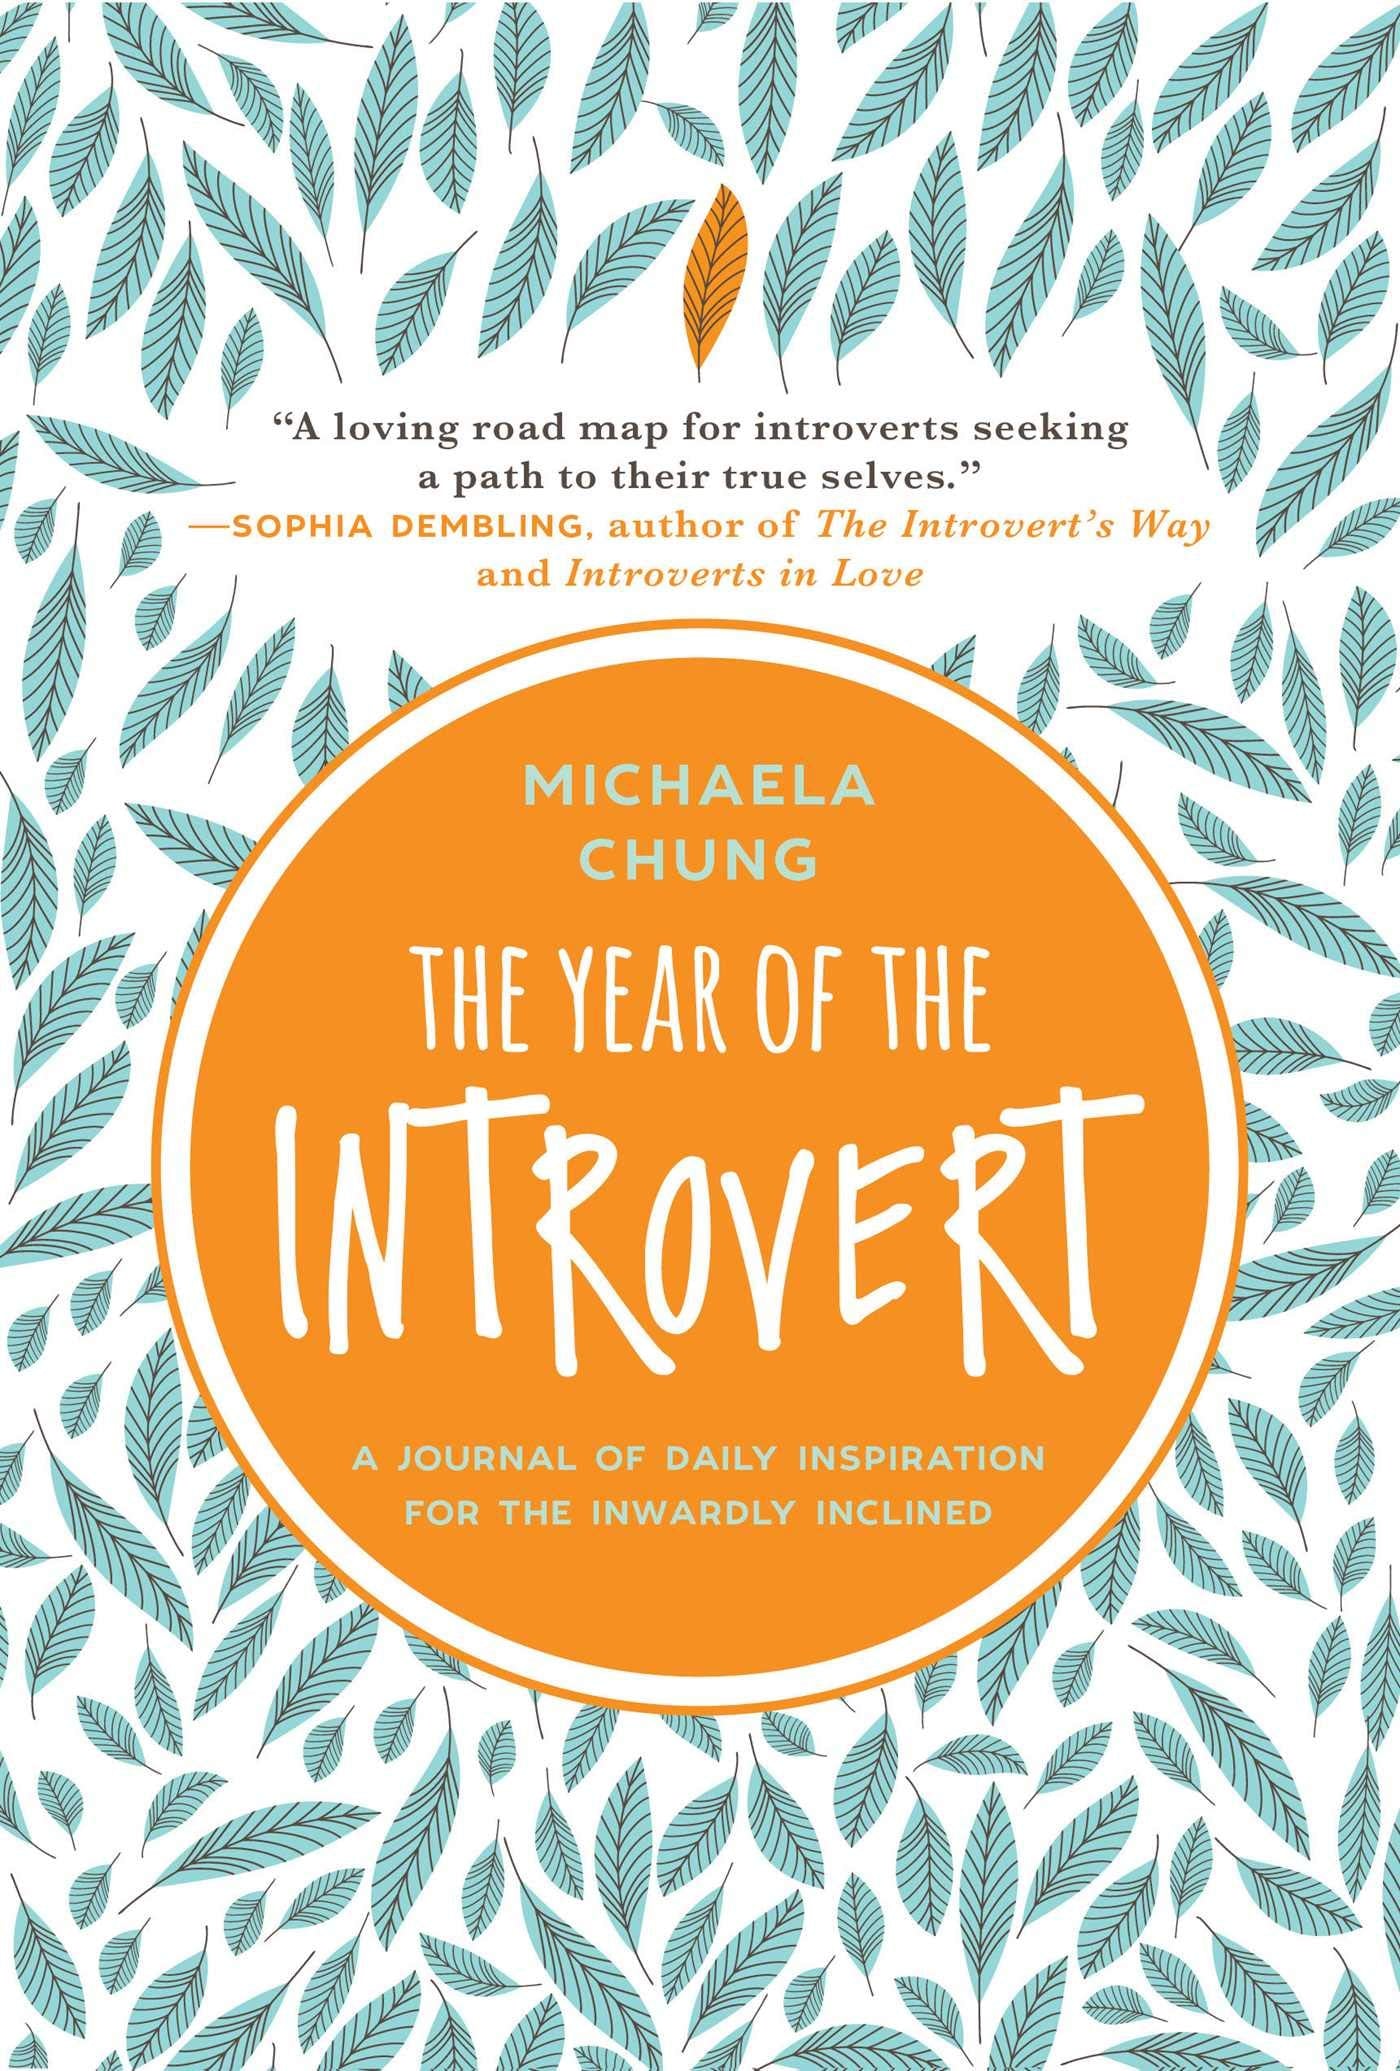 The Year of the Introvert: A Journal of Daily Inspiration for the Inwardly Inclined by Michaela Chung